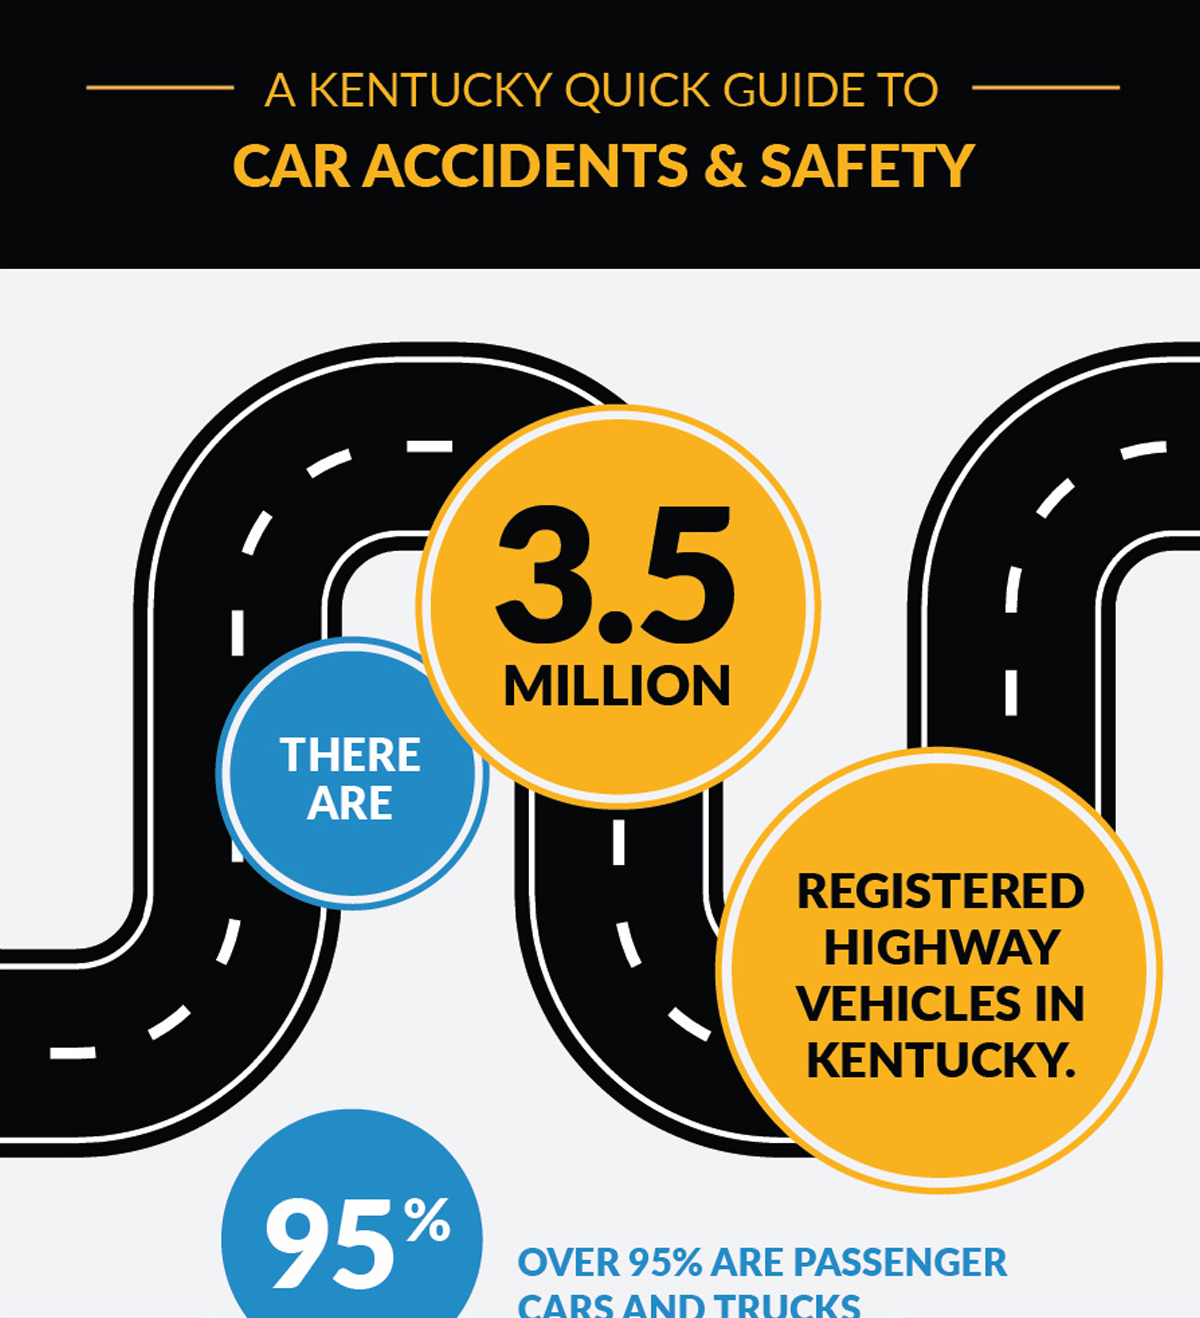 Kentucky car accident safety guide